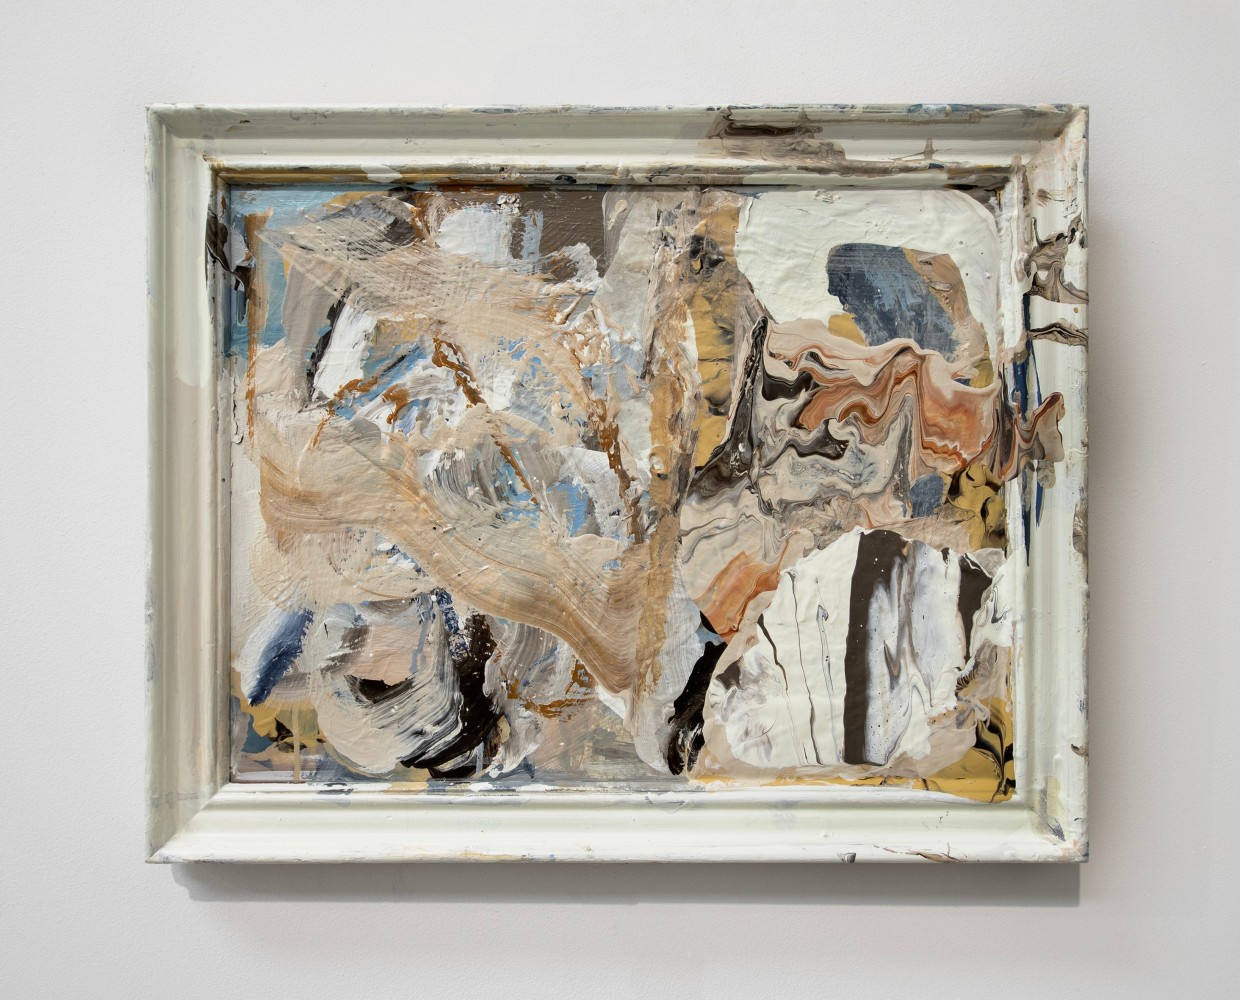 abstract painting with neutral colors in an off-white found frame.